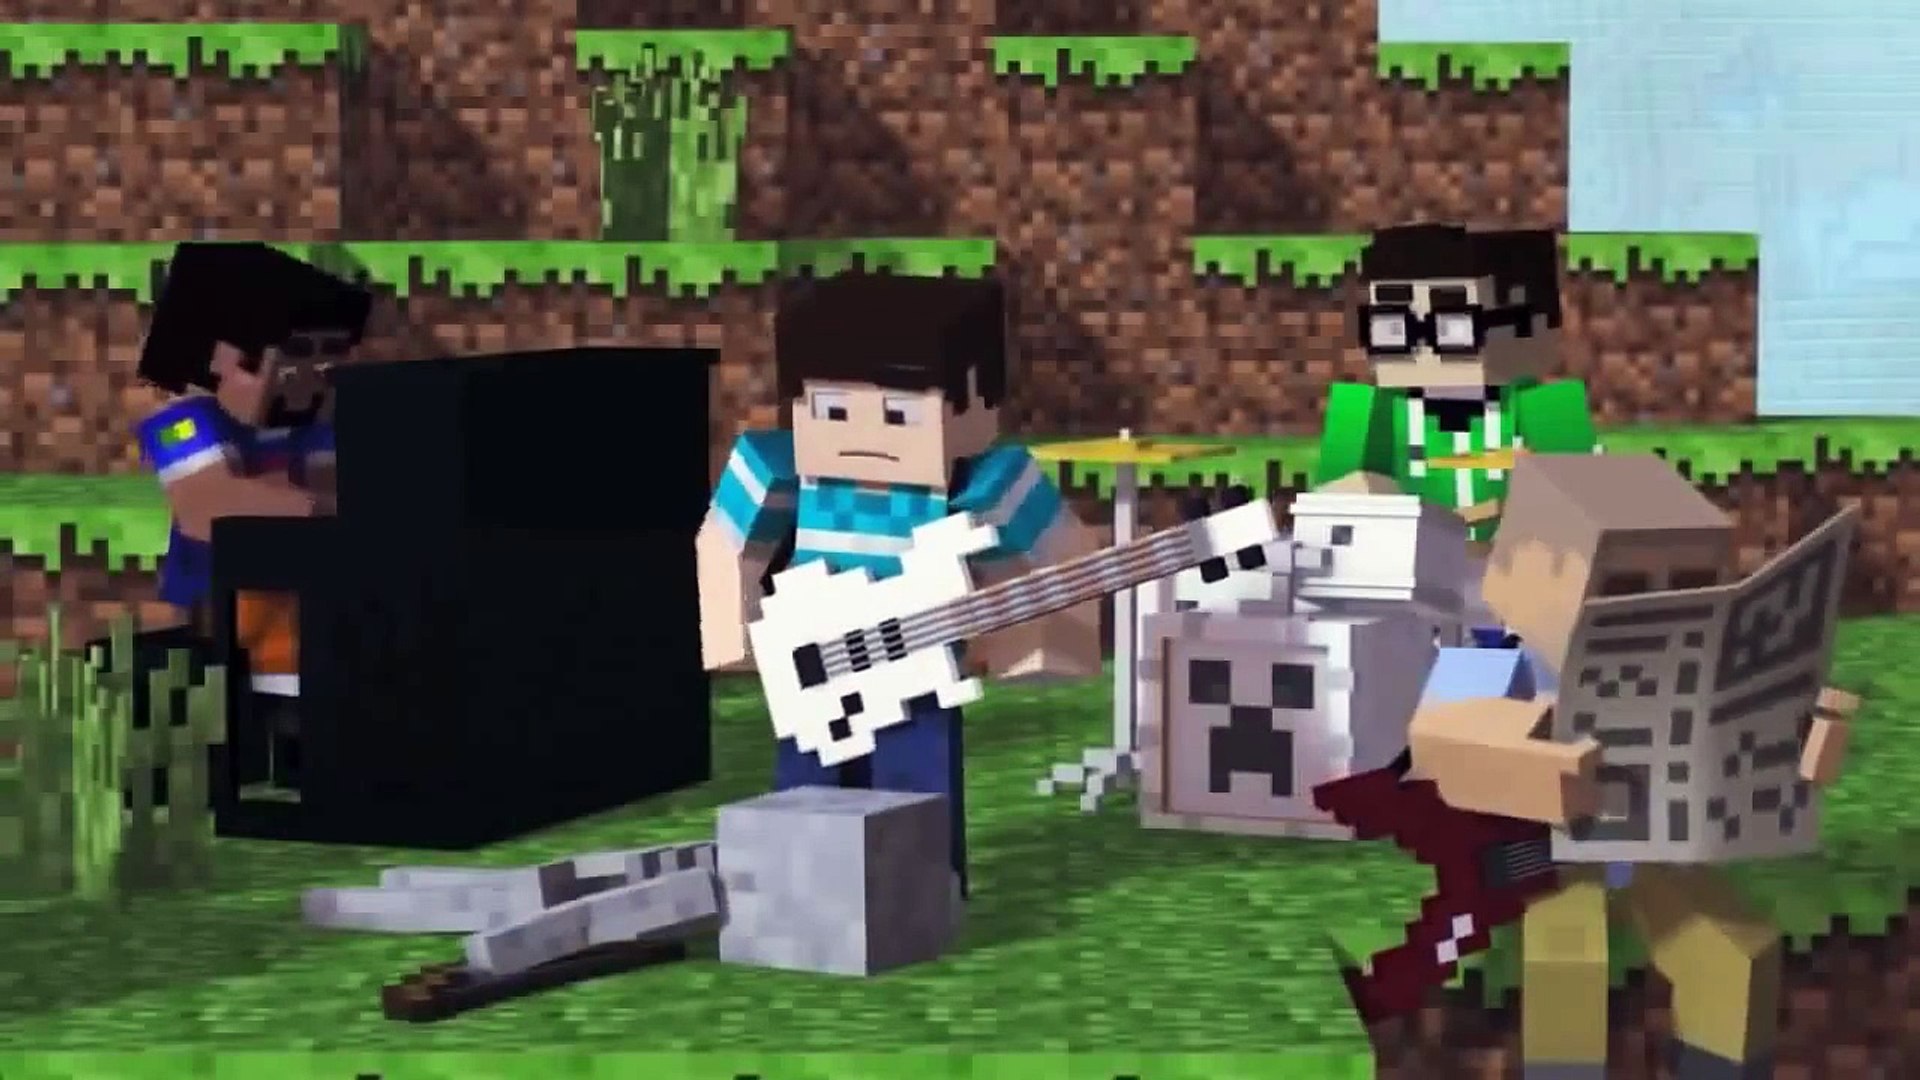 TOP 5 Minecraft Songs 2 Best New Animated Minecraft Songs of 2014 Minecraft Music Video